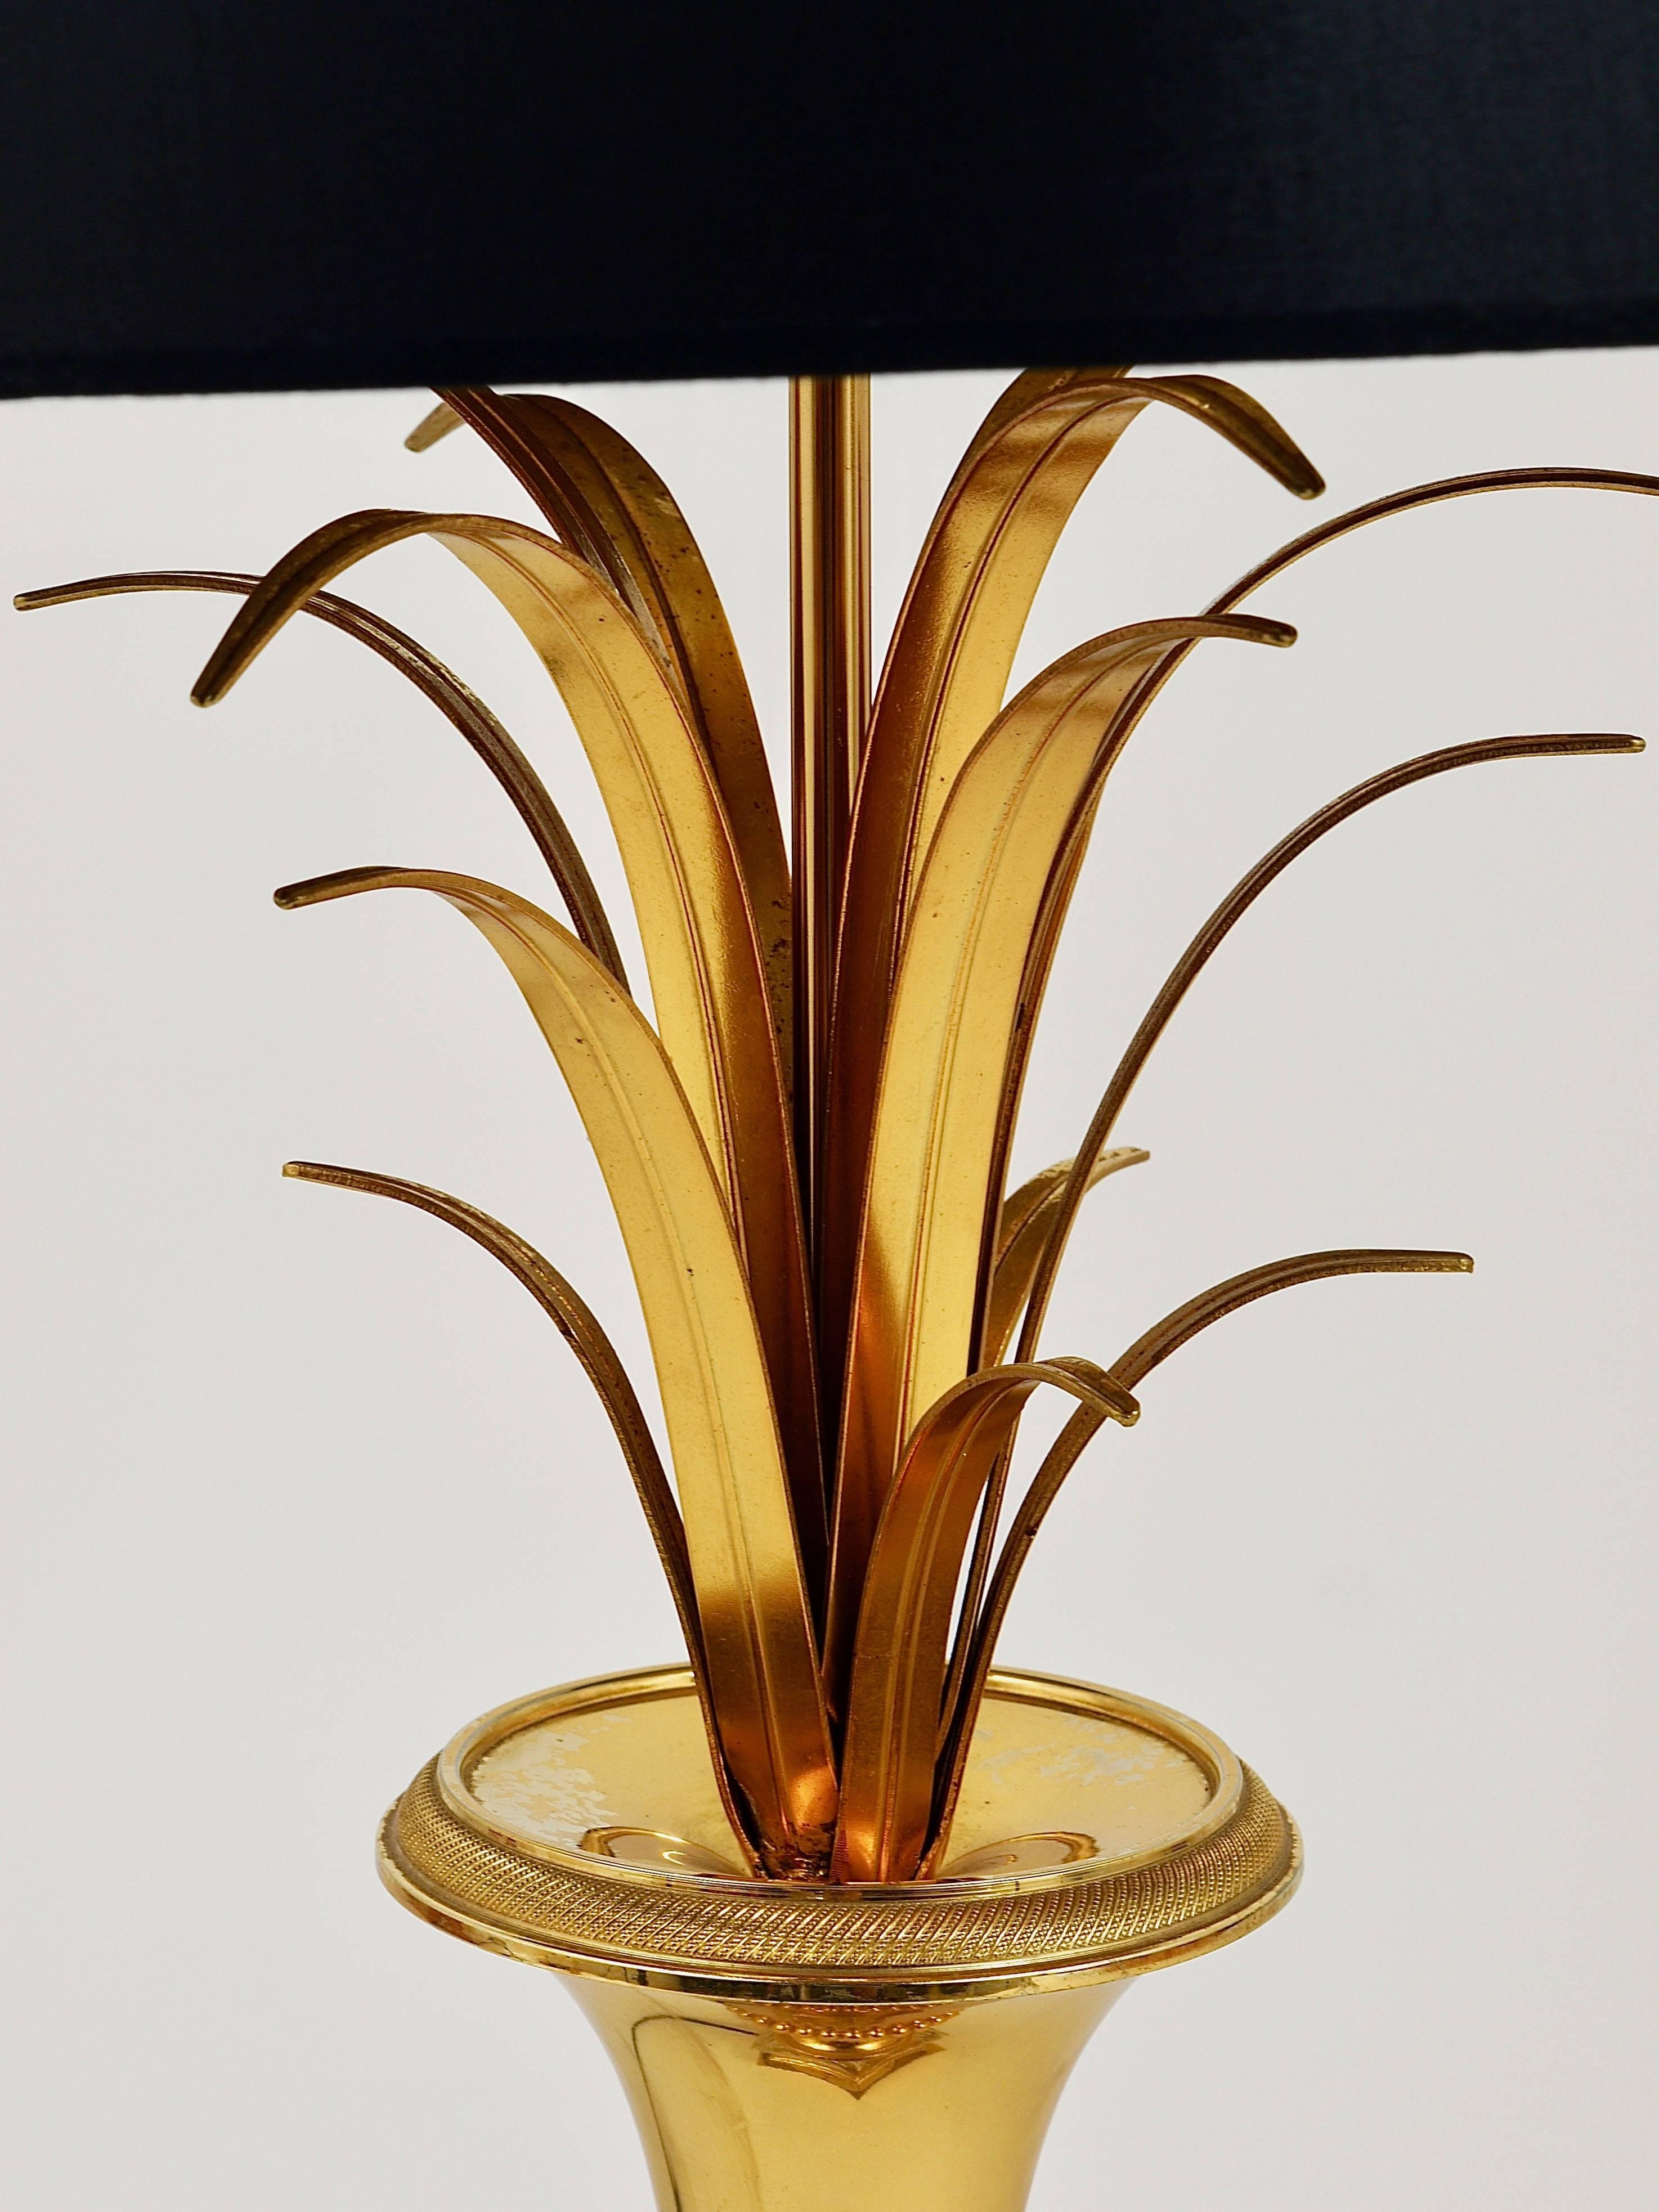 20th Century Hollywood Regency Gilt Brass and Glass Pineapple Leaf Table Lamp, France, 1970s For Sale